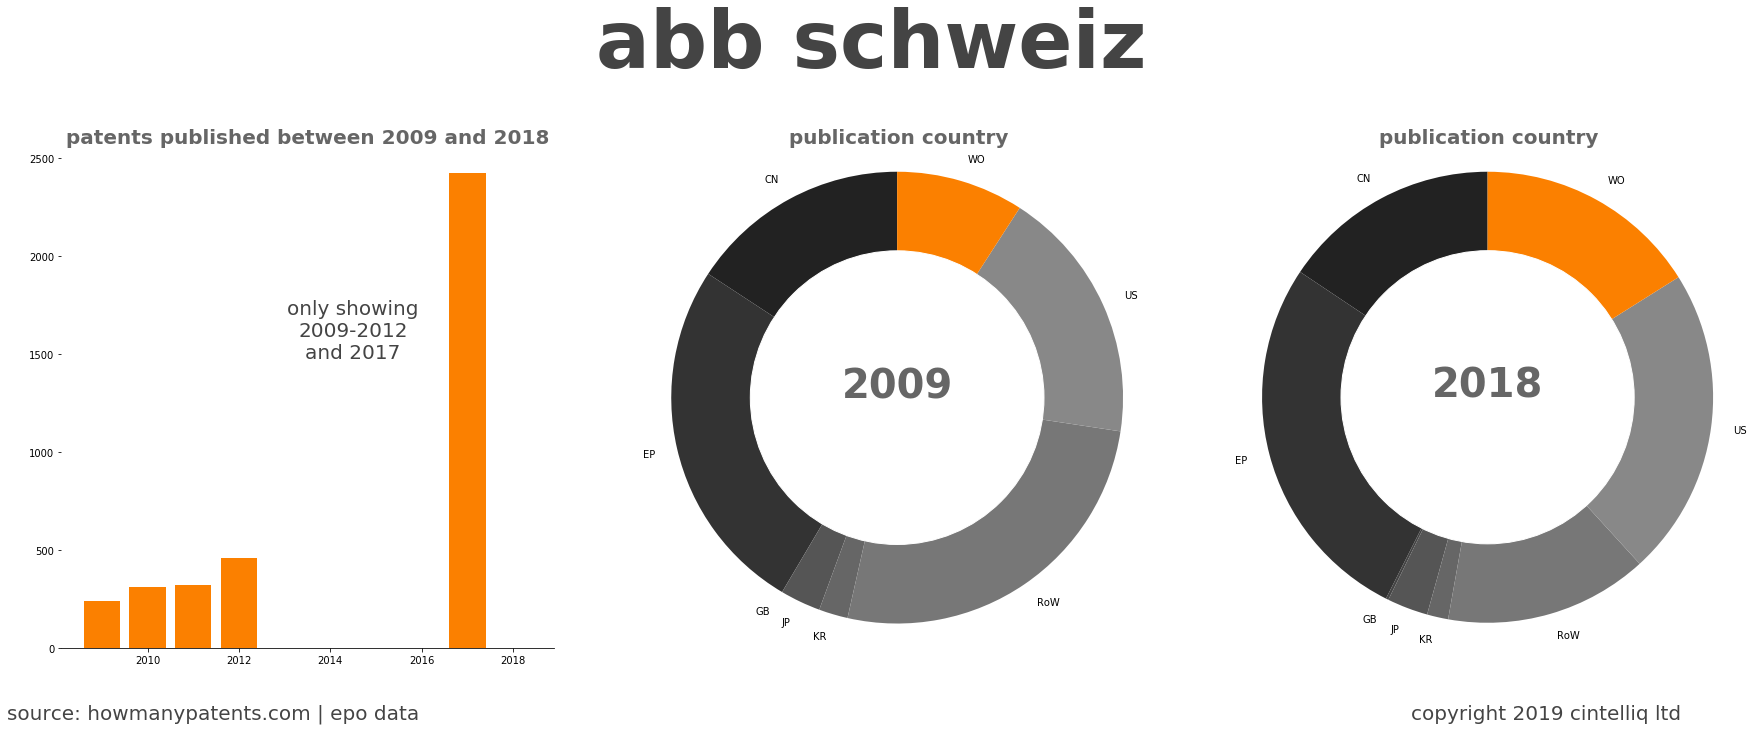 summary of patents for Abb Schweiz